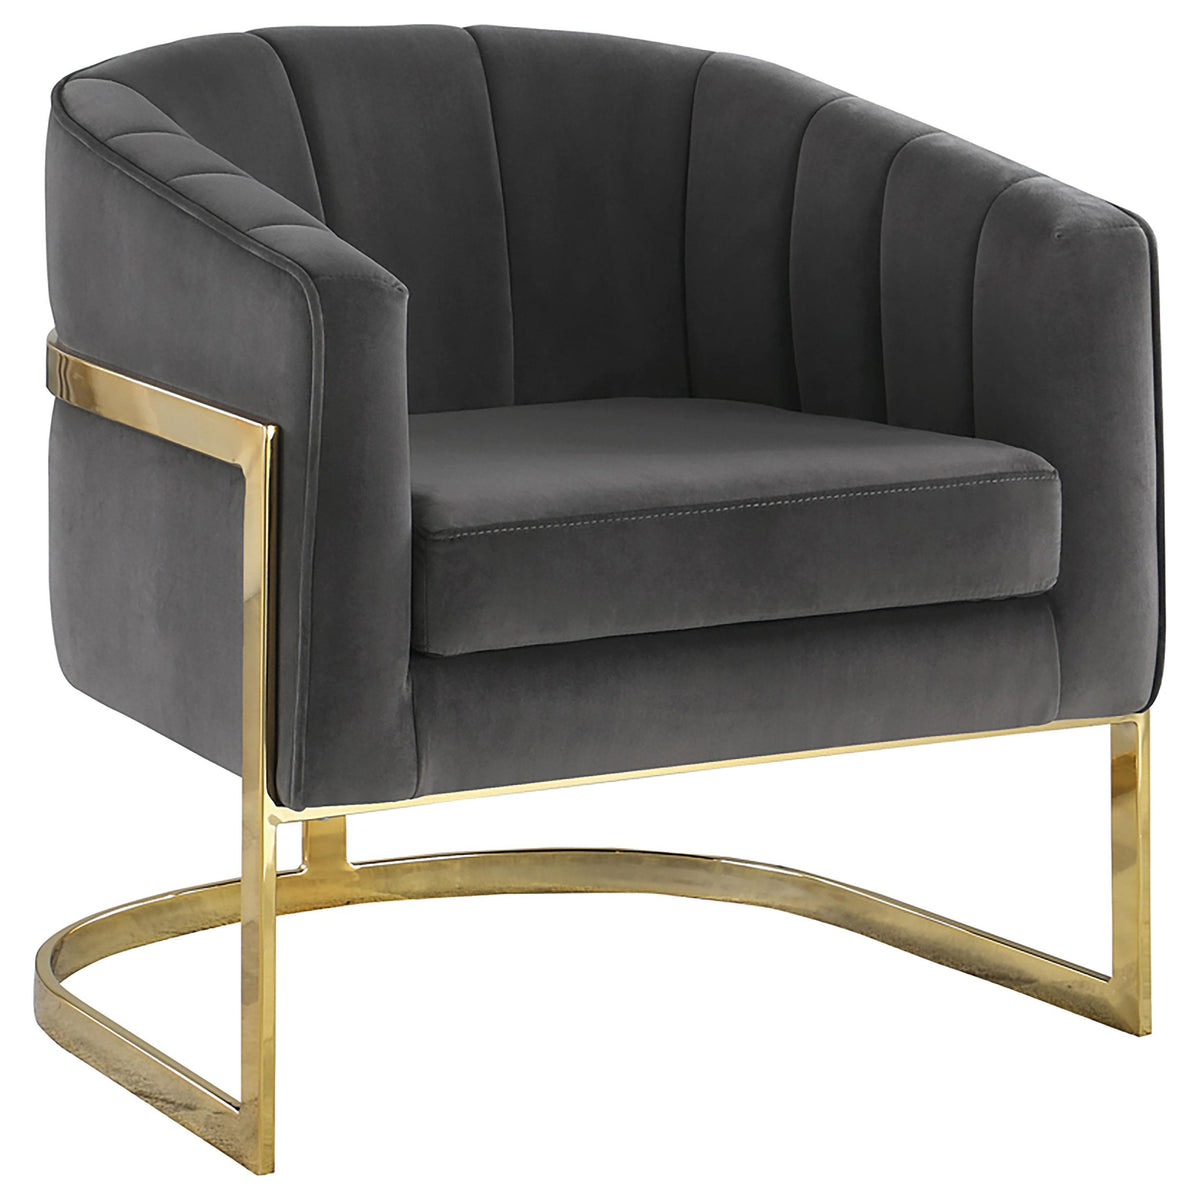 Joey Tufted Barrel Accent Chair Dark Grey and Gold Joey Tufted Barrel Accent Chair Dark Grey and Gold Half Price Furniture